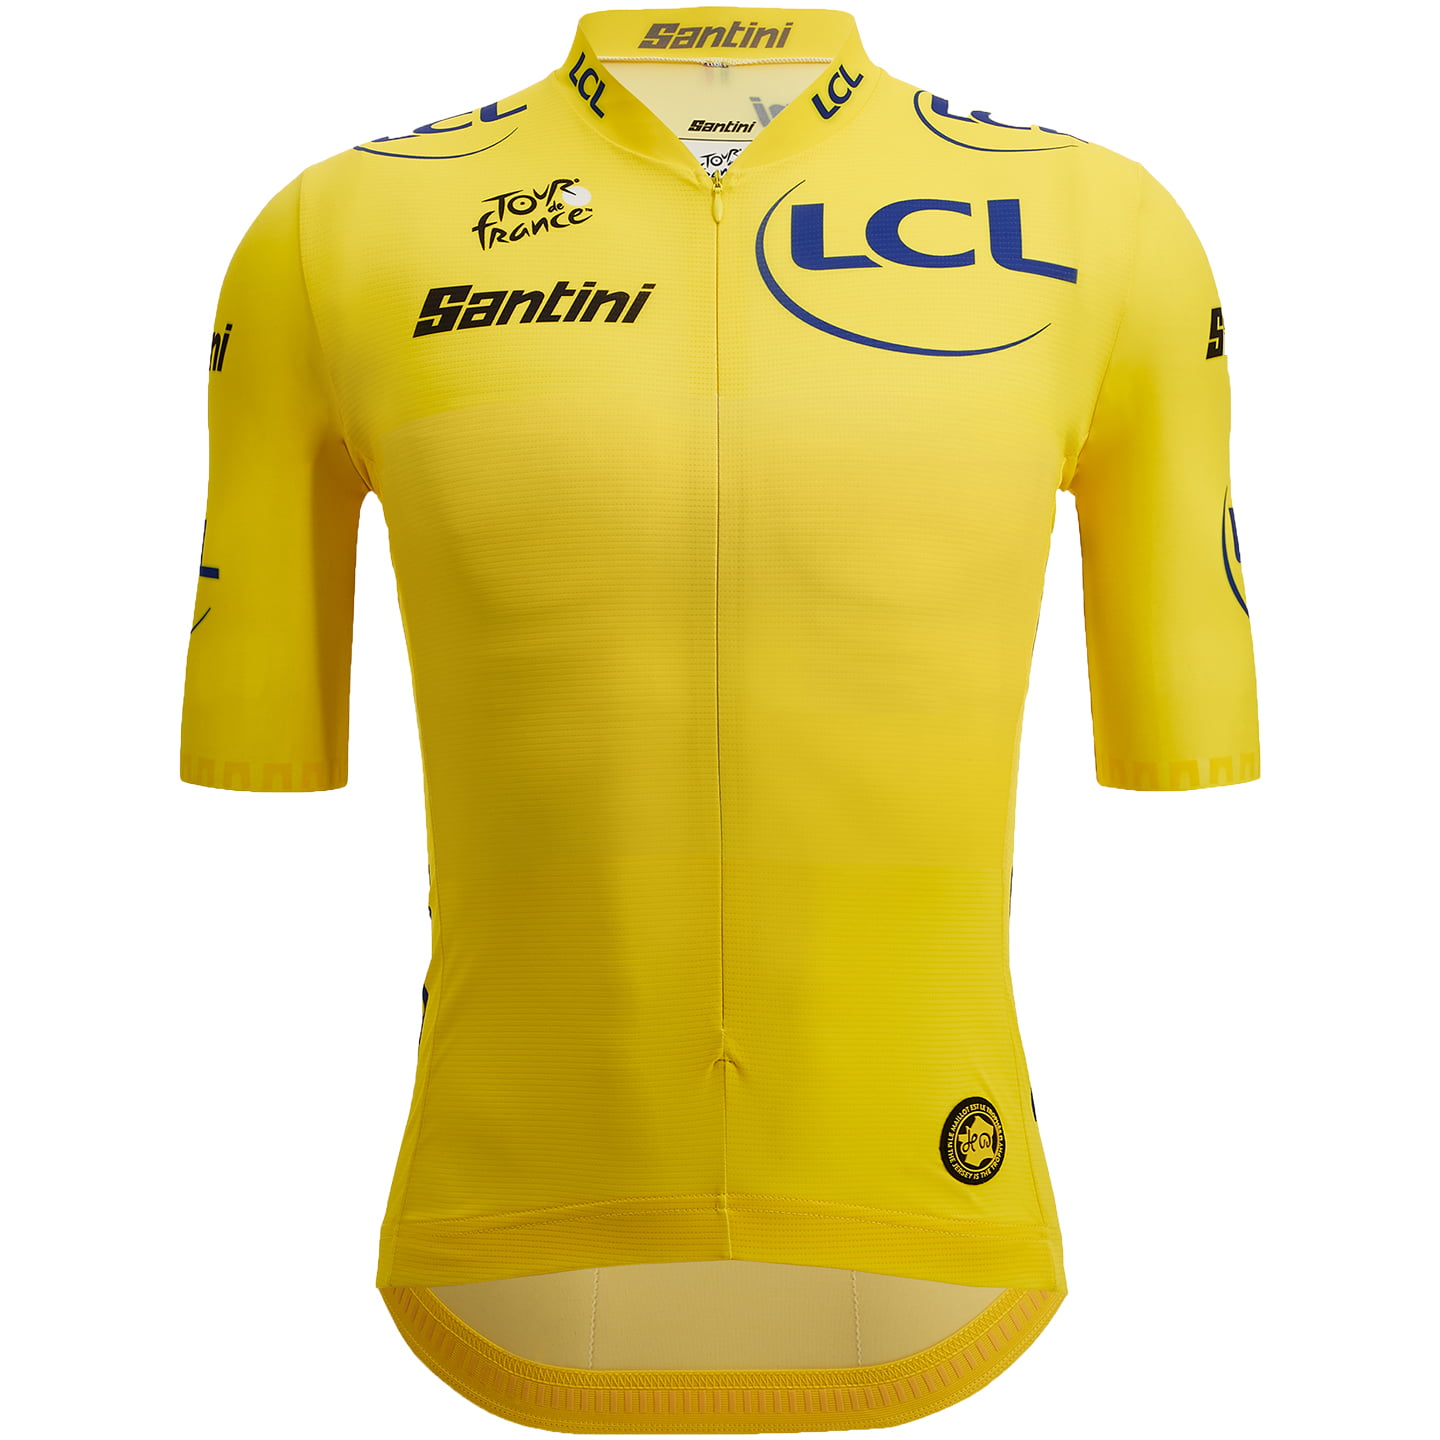 TOUR DE FRANCE Race Yellow Jersey 2023 Short Sleeve Jersey, for men, size L, Cycling shirt, Cycle clothing